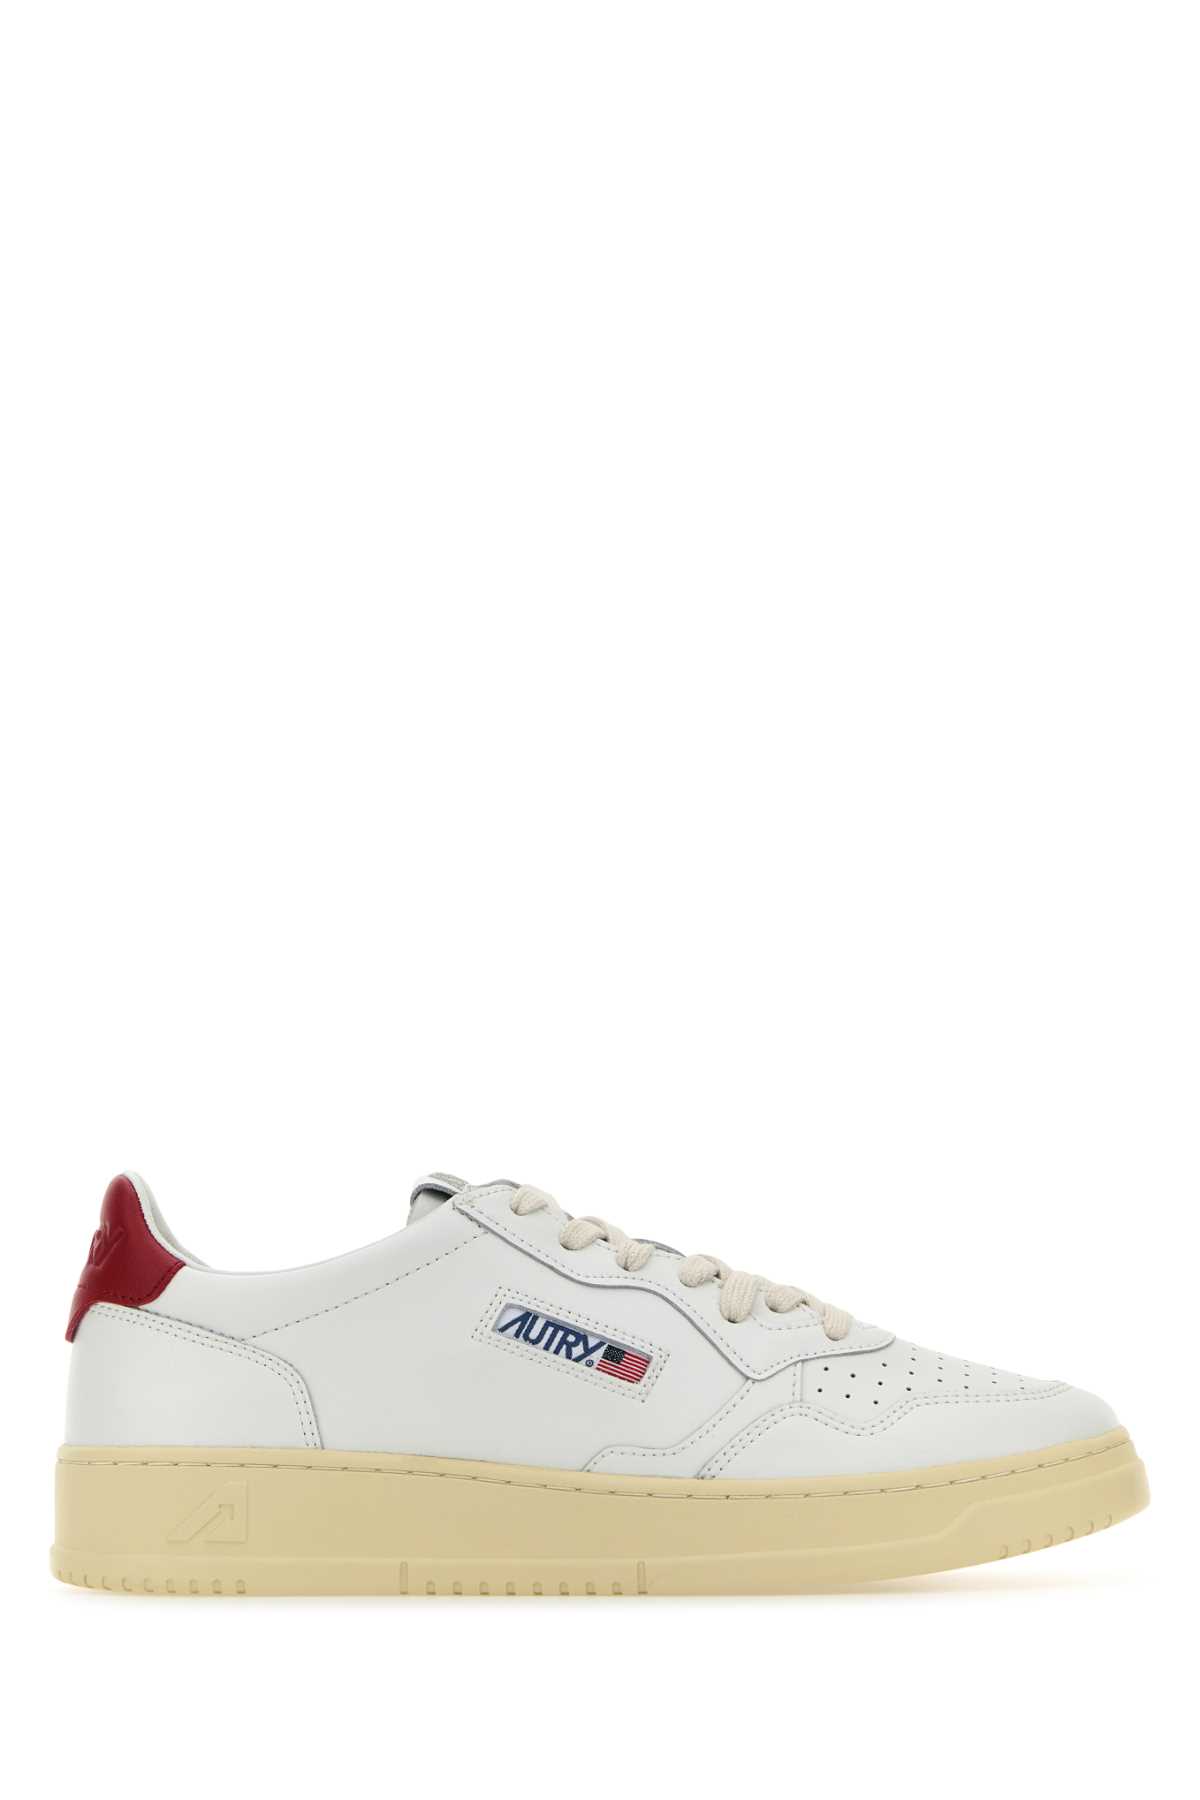 Shop Autry White Leather Medalist Sneakers